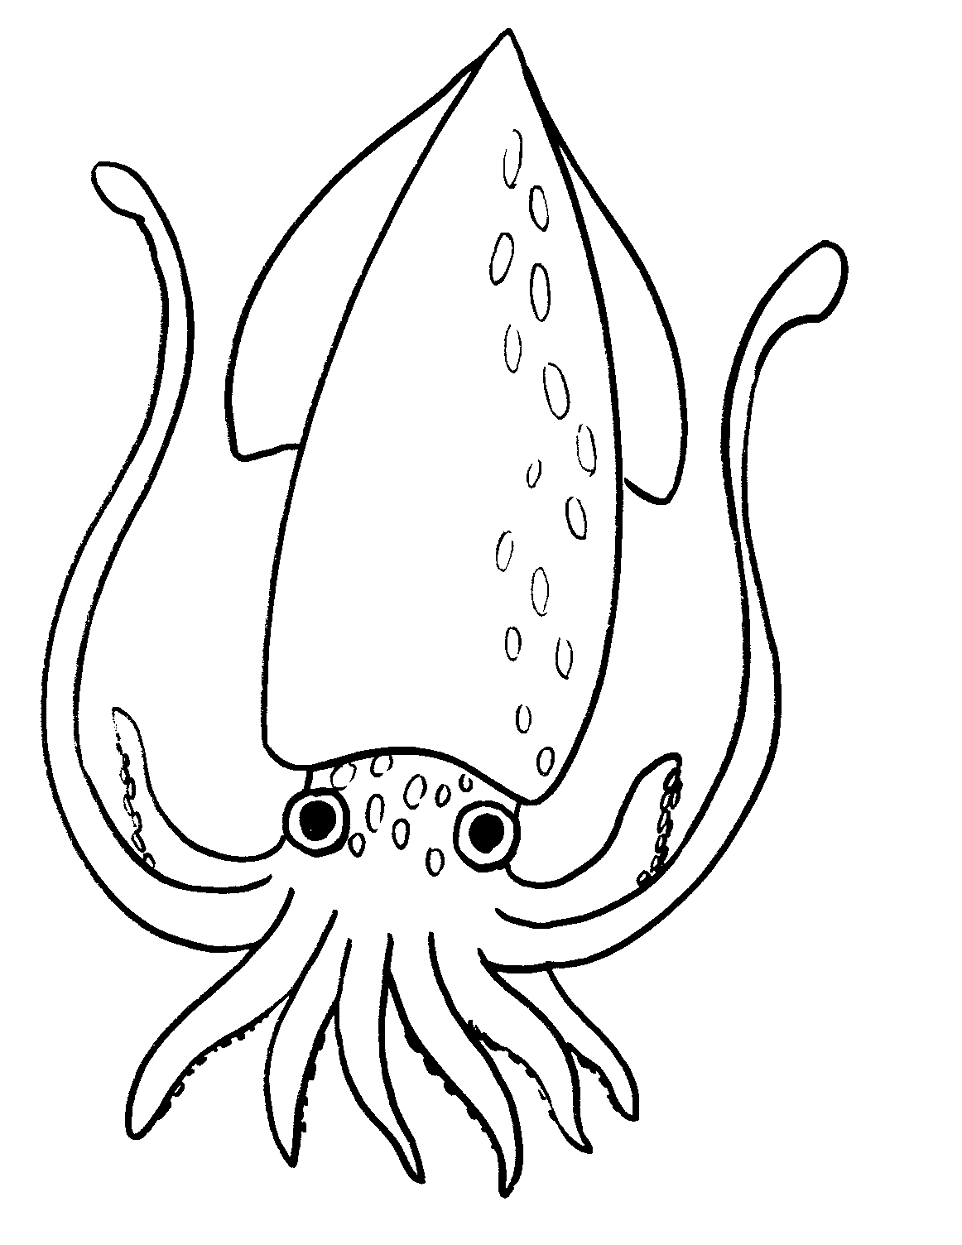 Printable Squid Free Coloring Pages